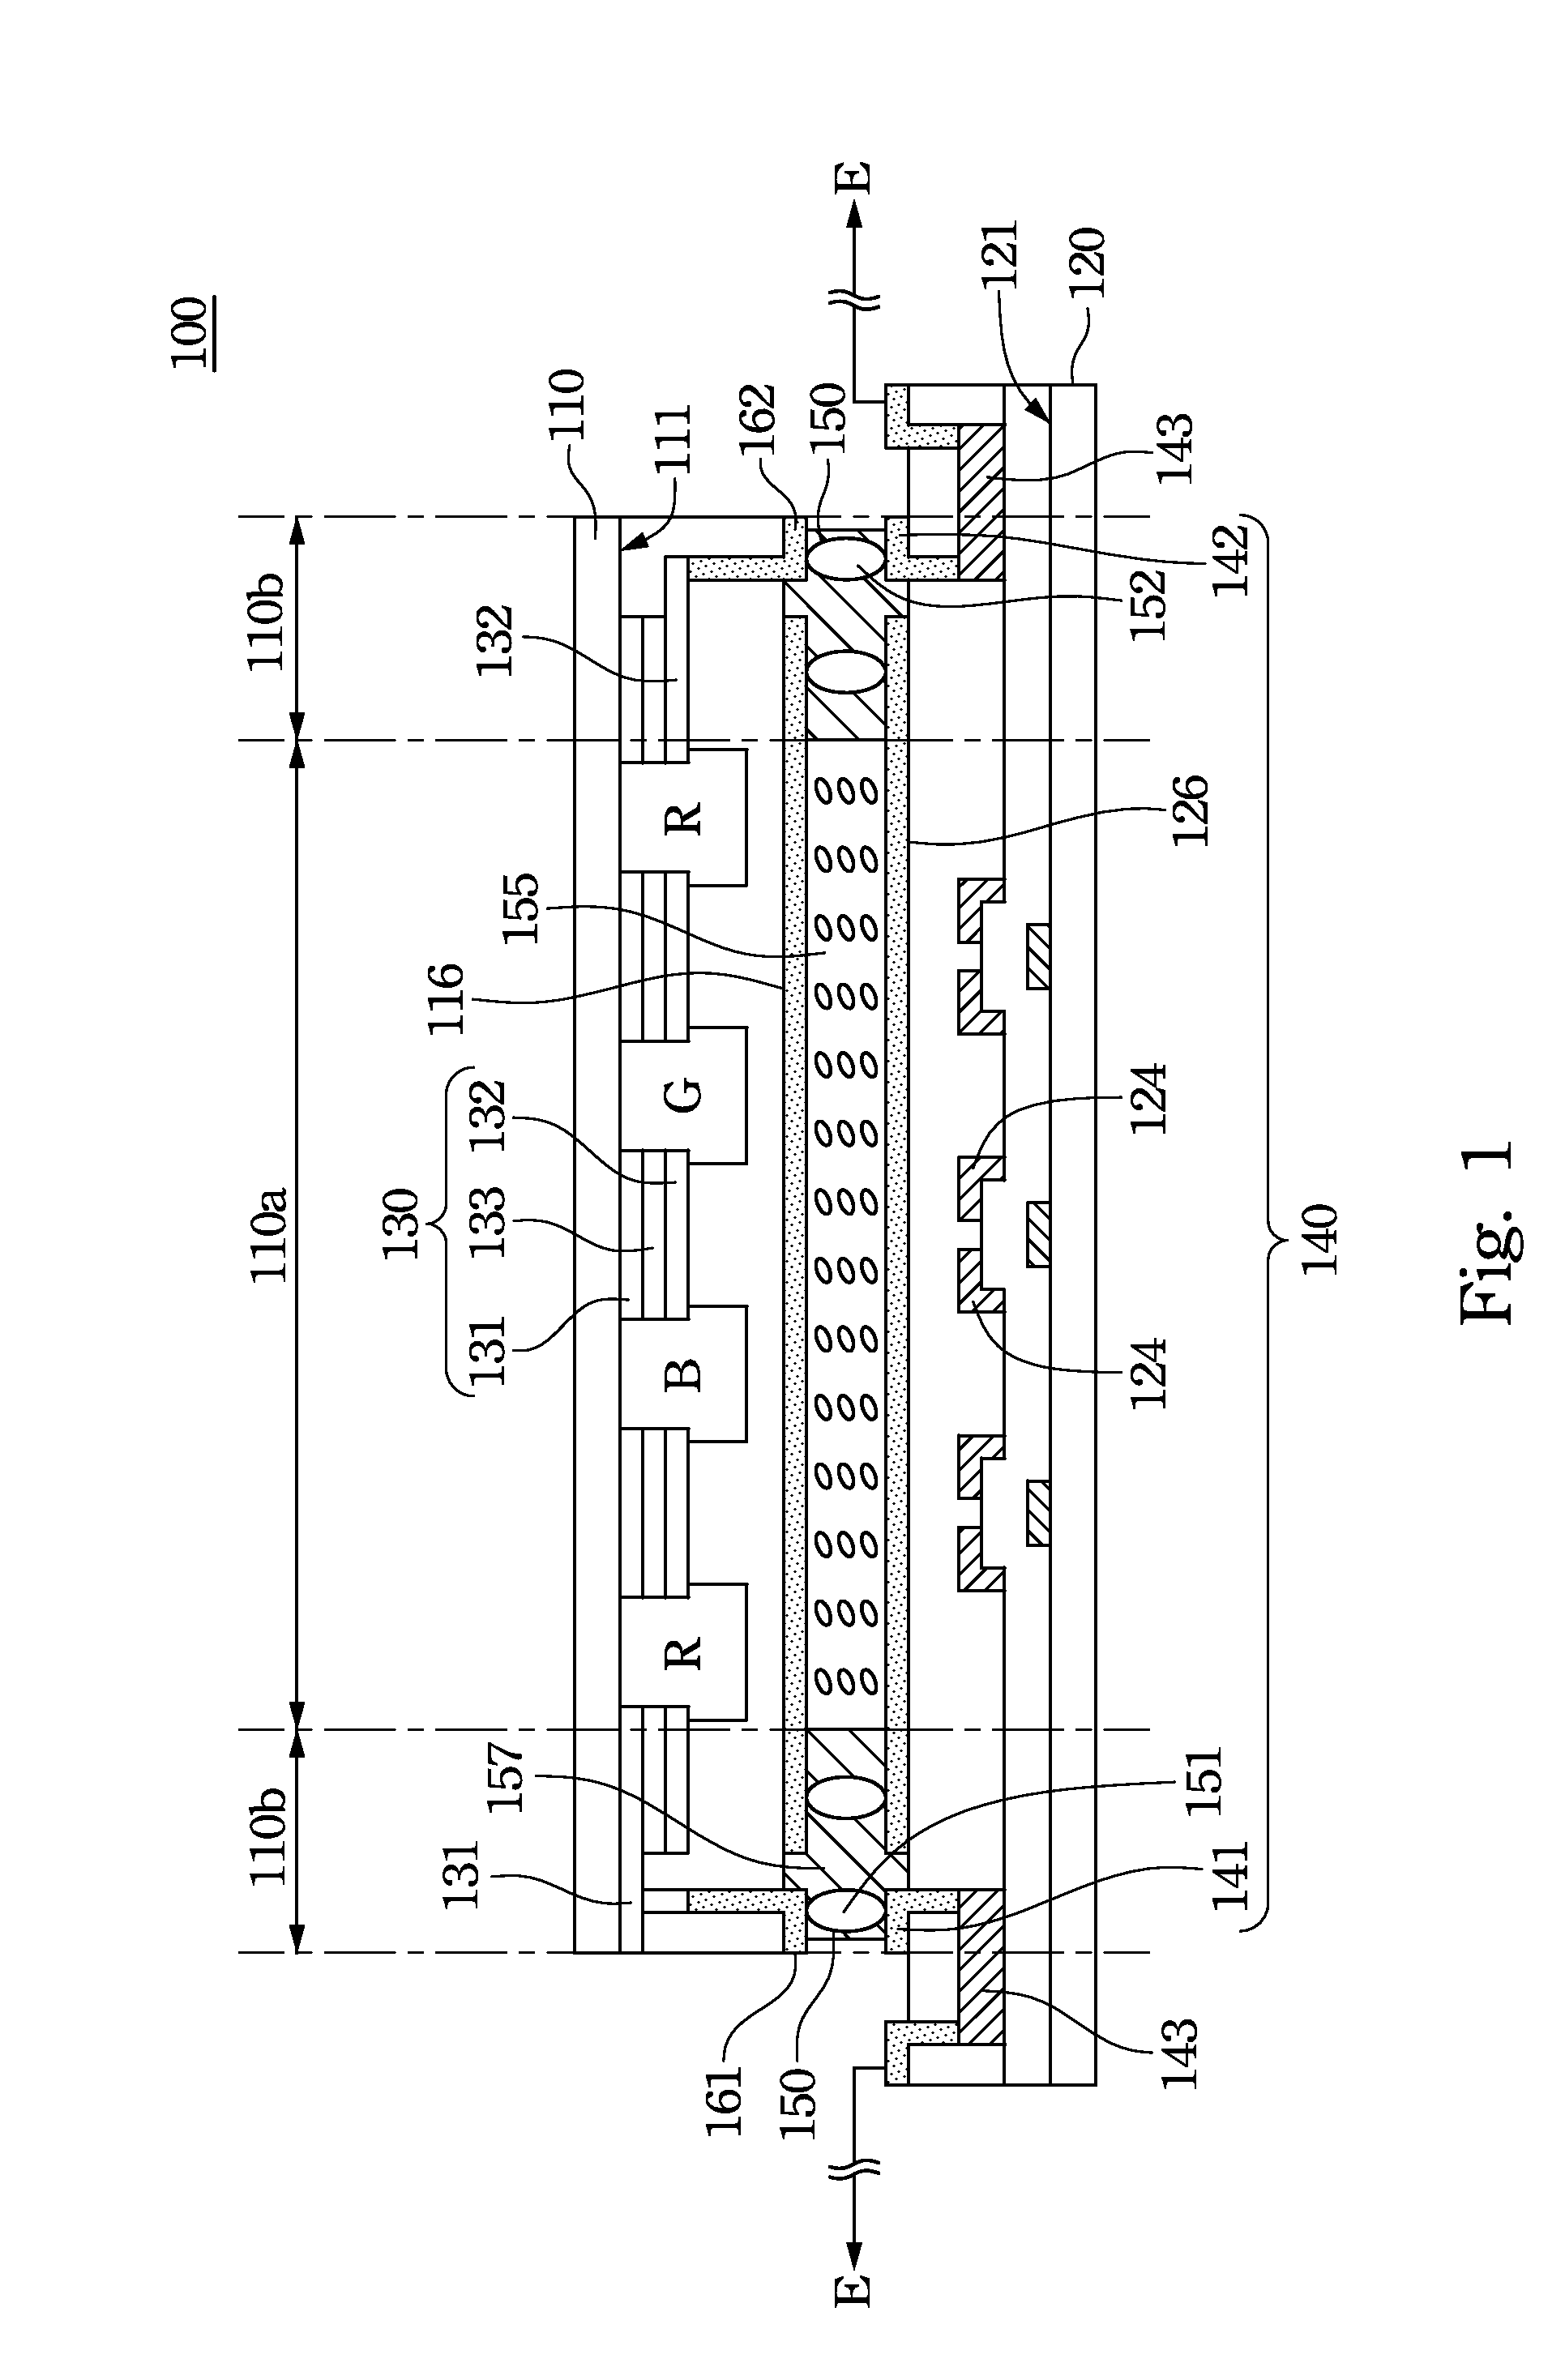 Flat display device integrated with photovoltaic cell